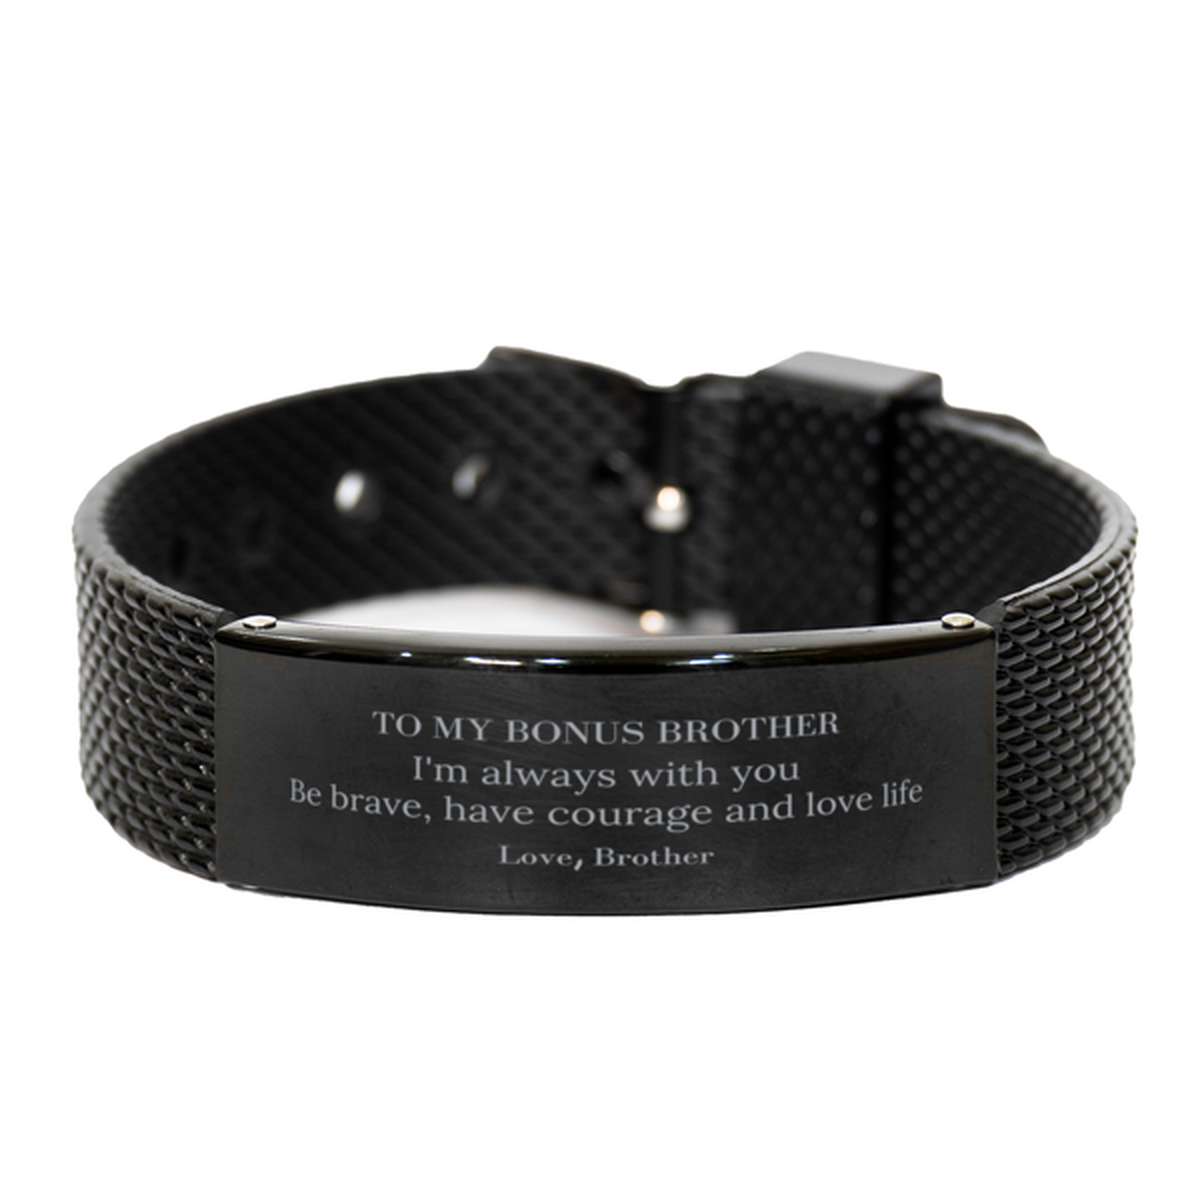 To My Bonus Brother Gifts from Brother, Unique Black Shark Mesh Bracelet Inspirational Christmas Birthday Graduation Gifts for Bonus Brother I'm always with you. Be brave, have courage and love life. Love, Brother